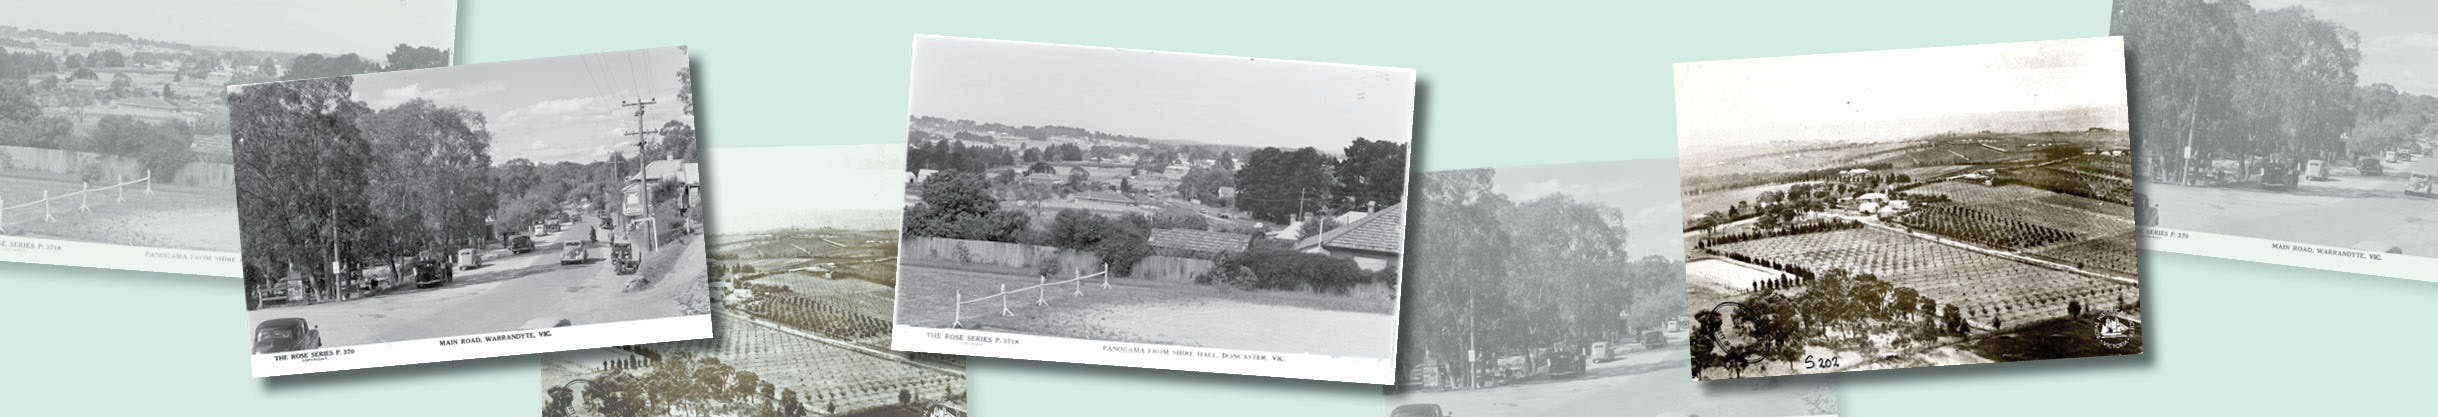 Vintage photos of landscapes of Manningham orchards, farm land and streetscapes